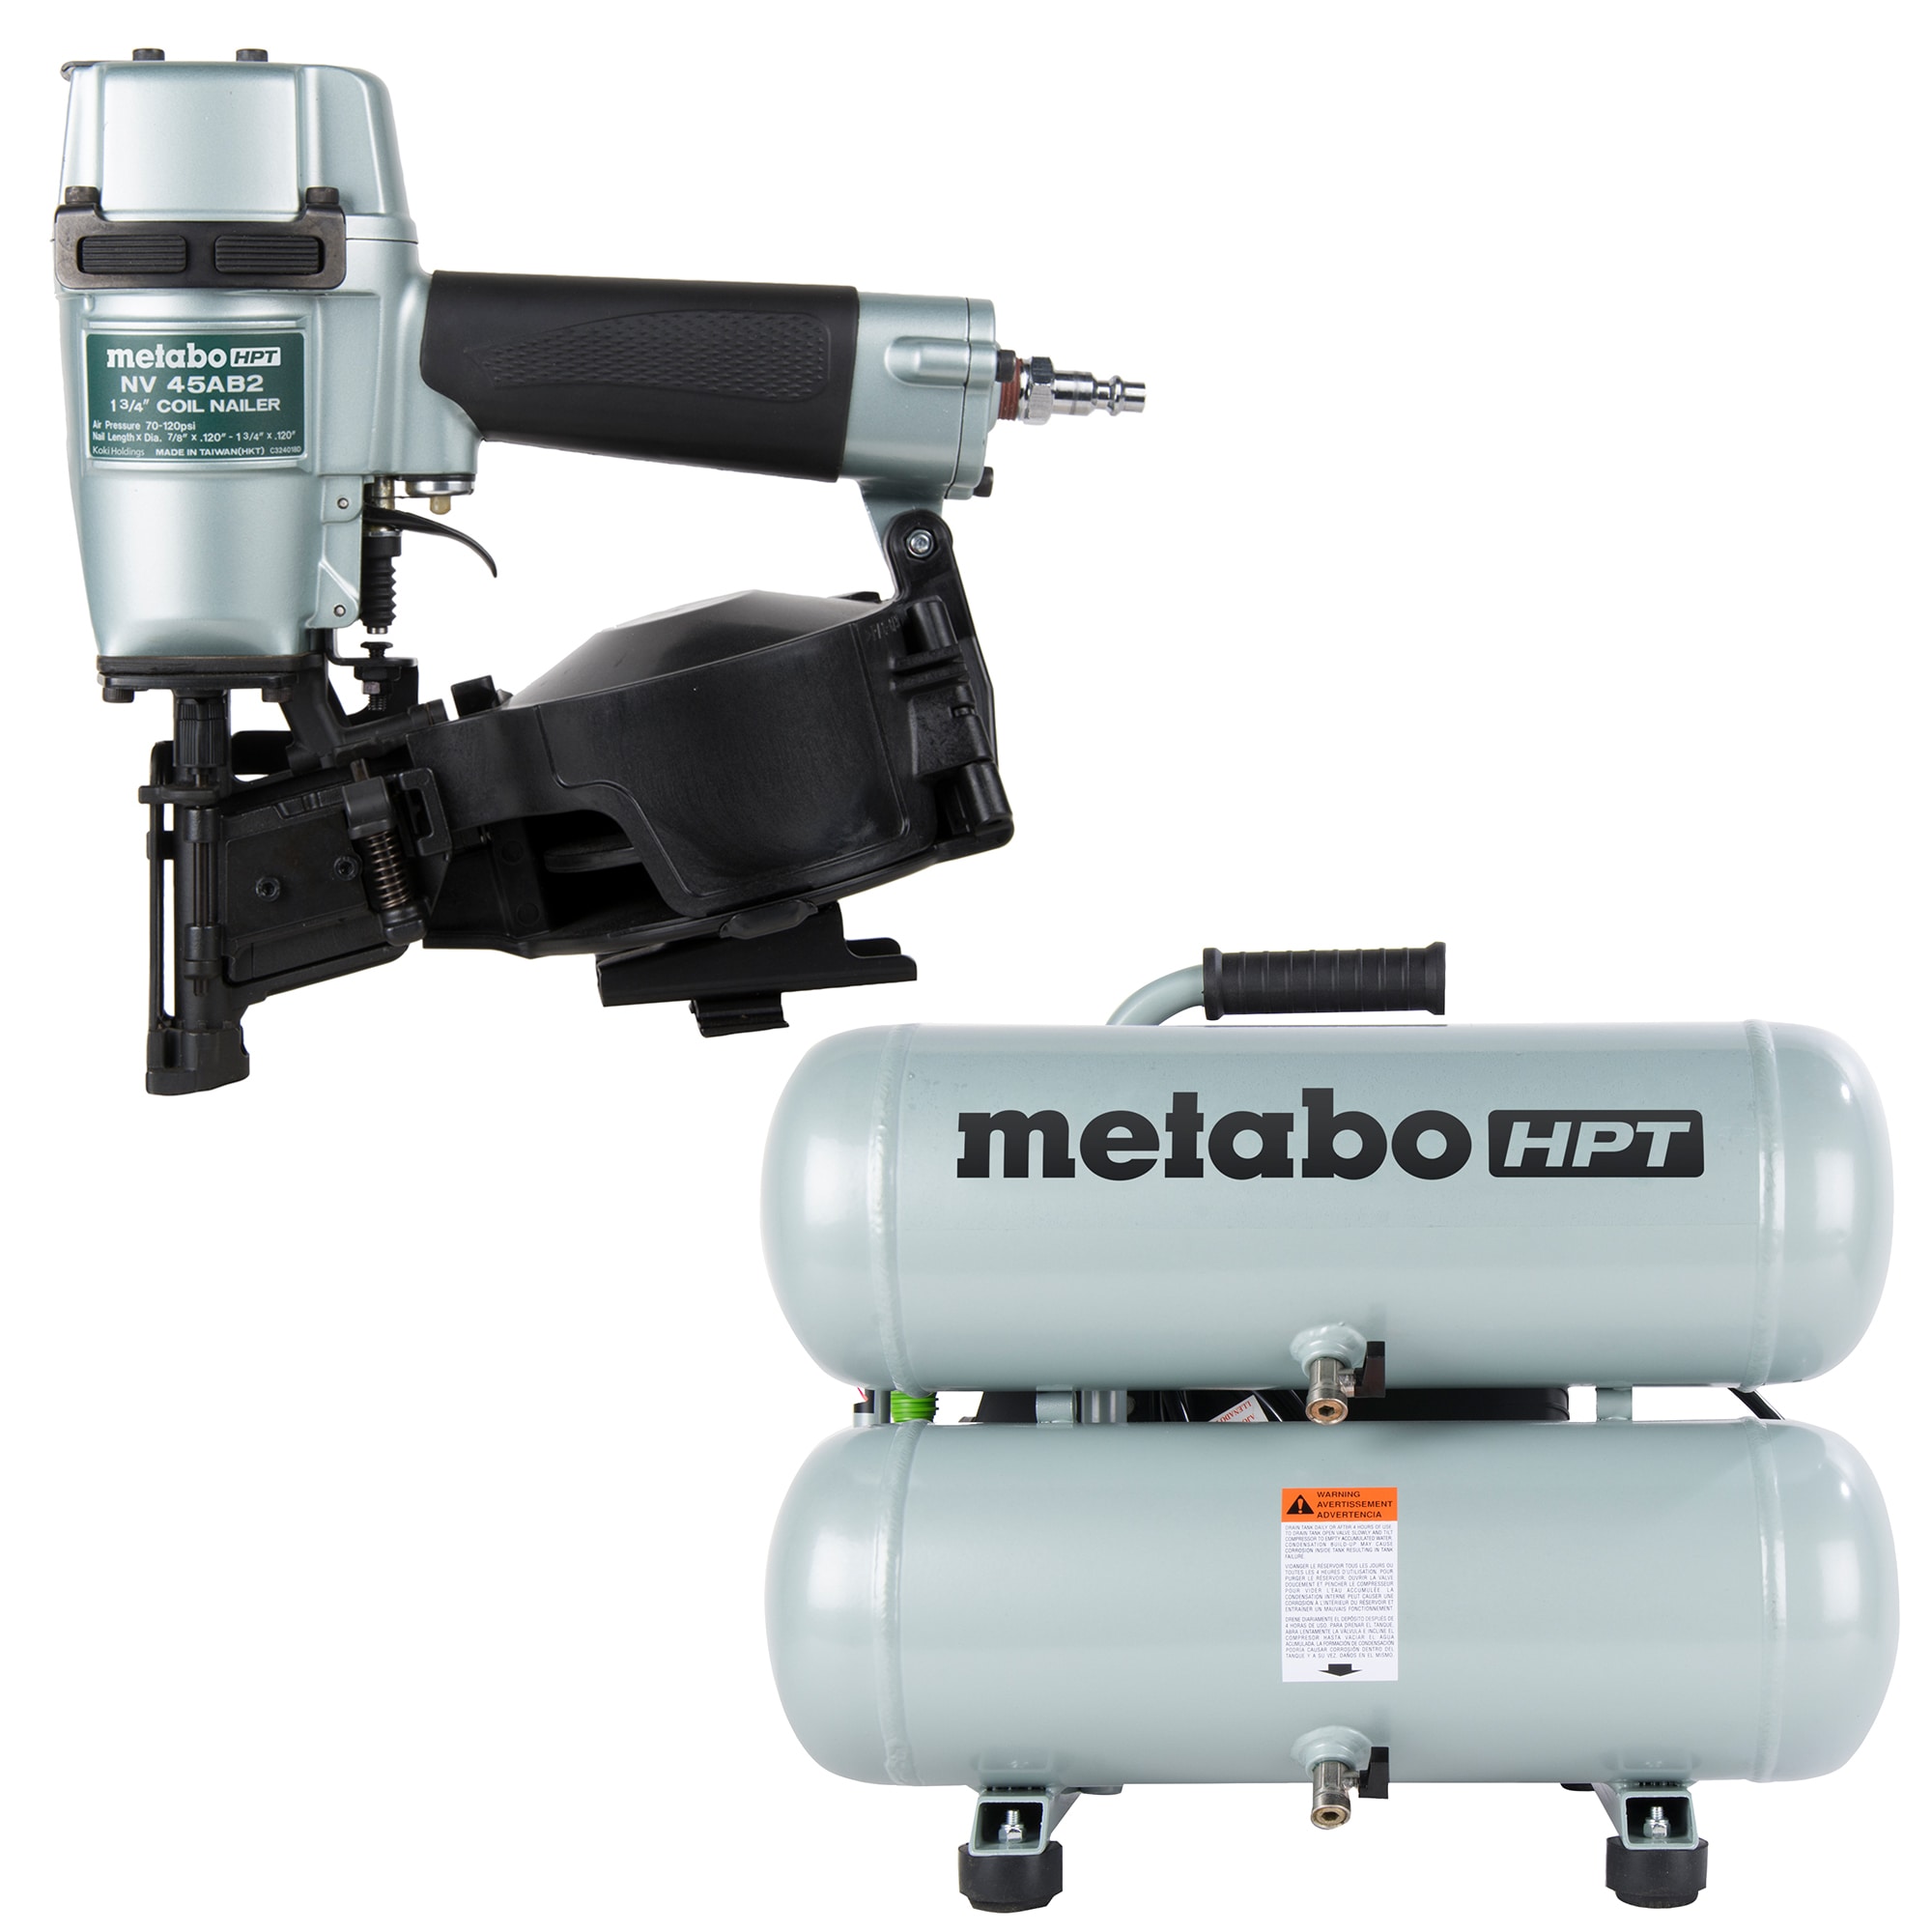 Metabo HPT 15-Degree Pneumatic Roofing Nailer with 4-Gallon Single Stage Portable Electric Twin Stack Air Compressor